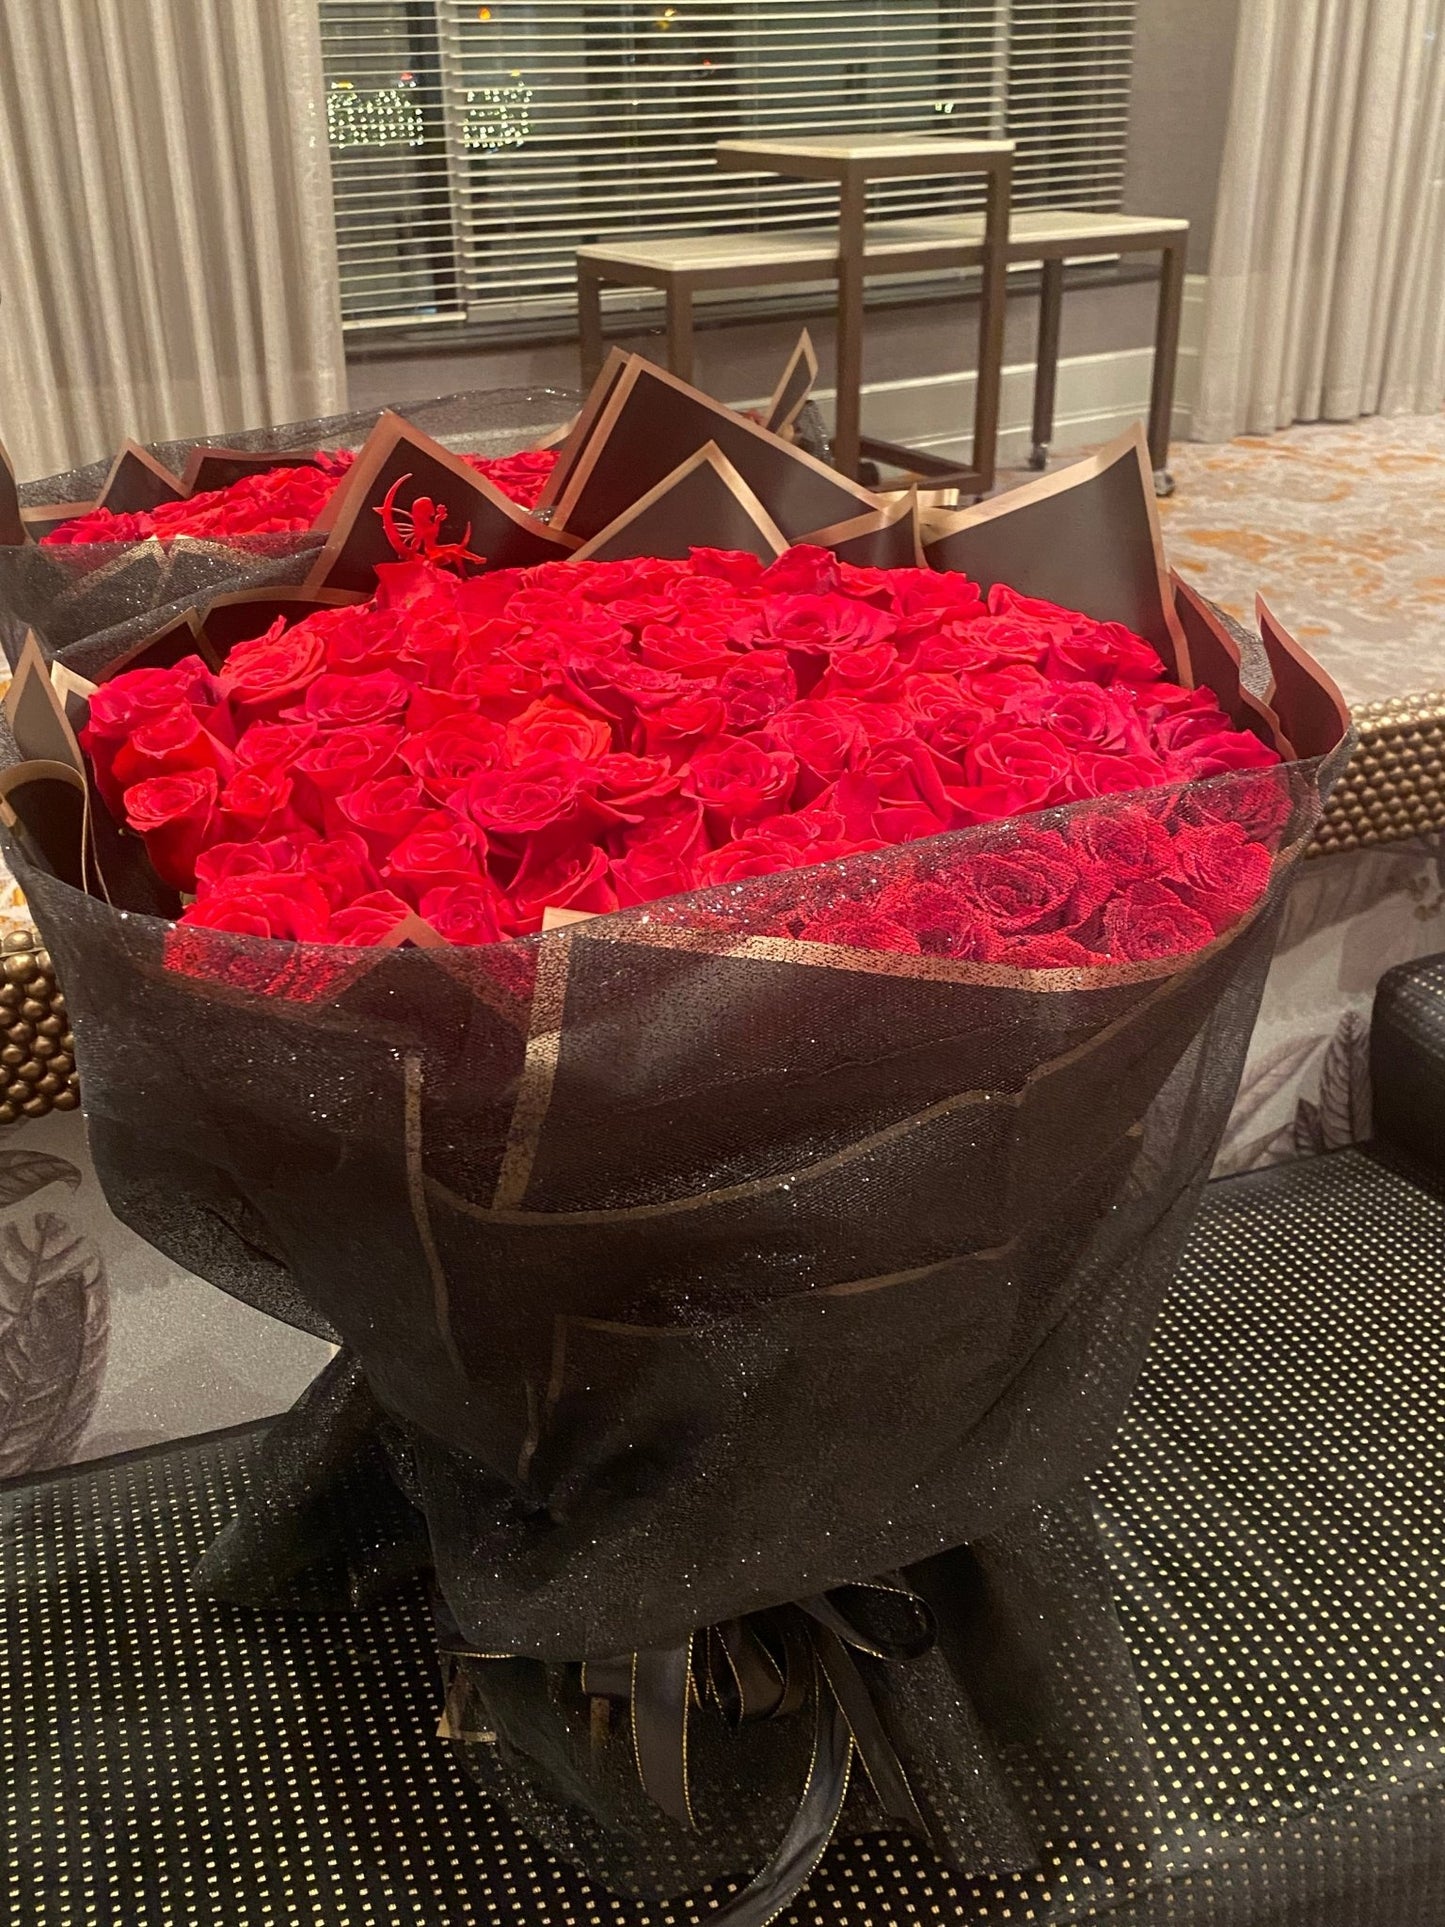 200 ROSES WRAPPED